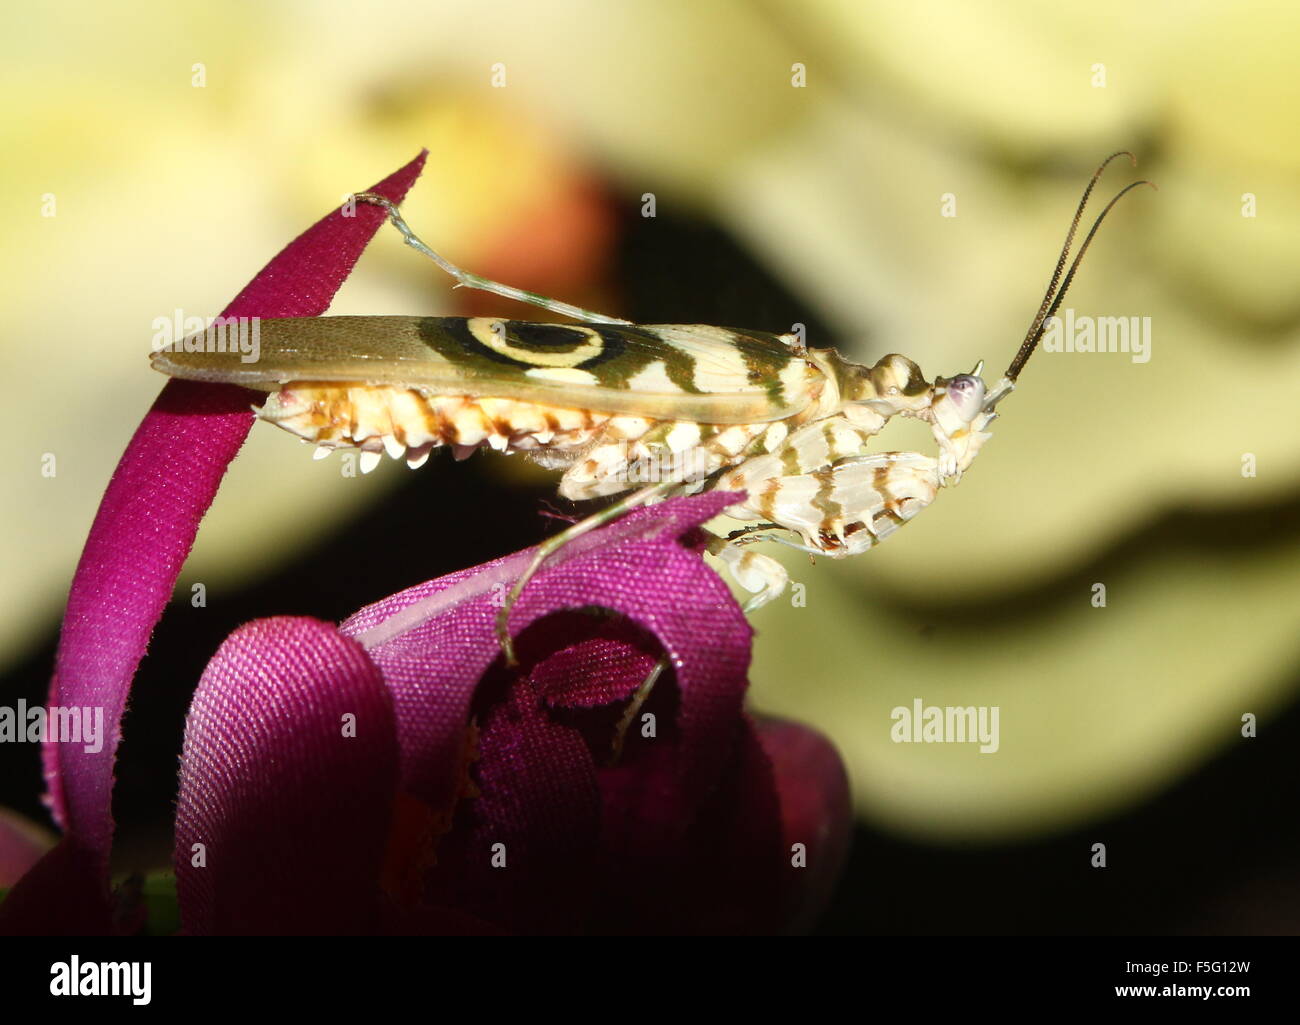 East African Spiny flower mantis (Pseudocreobotra wahlbergi) posing on an artificial (fabric) flower Stock Photo